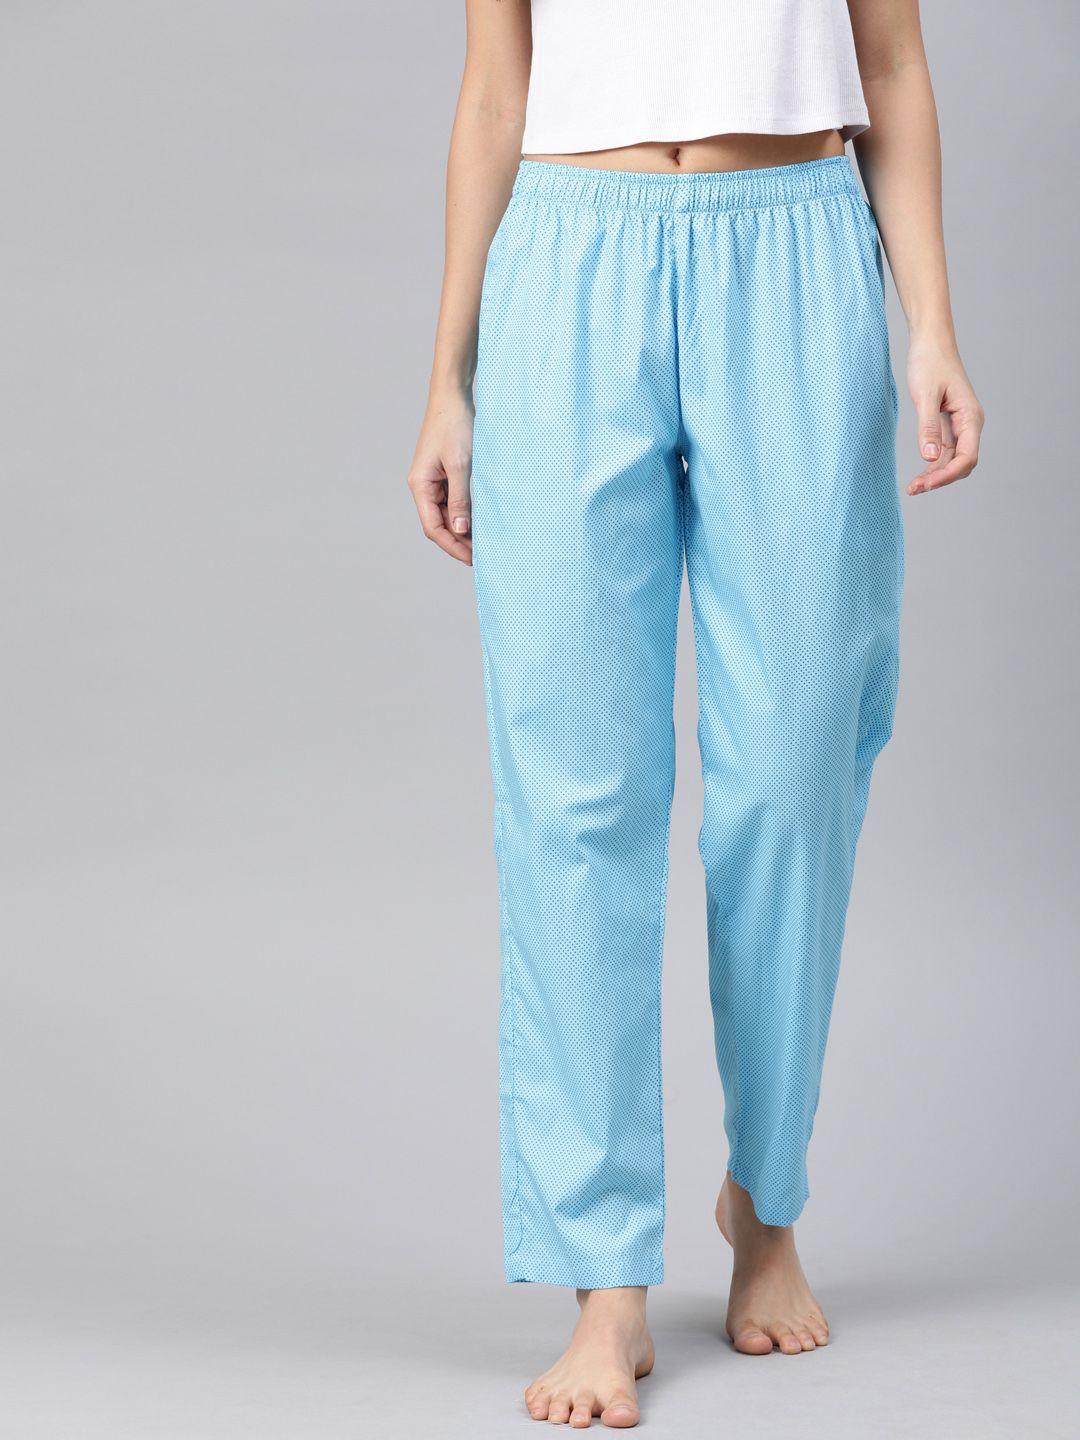 drape-in-vogue-women-blue-printed-relaxed-fit-lounge-pants